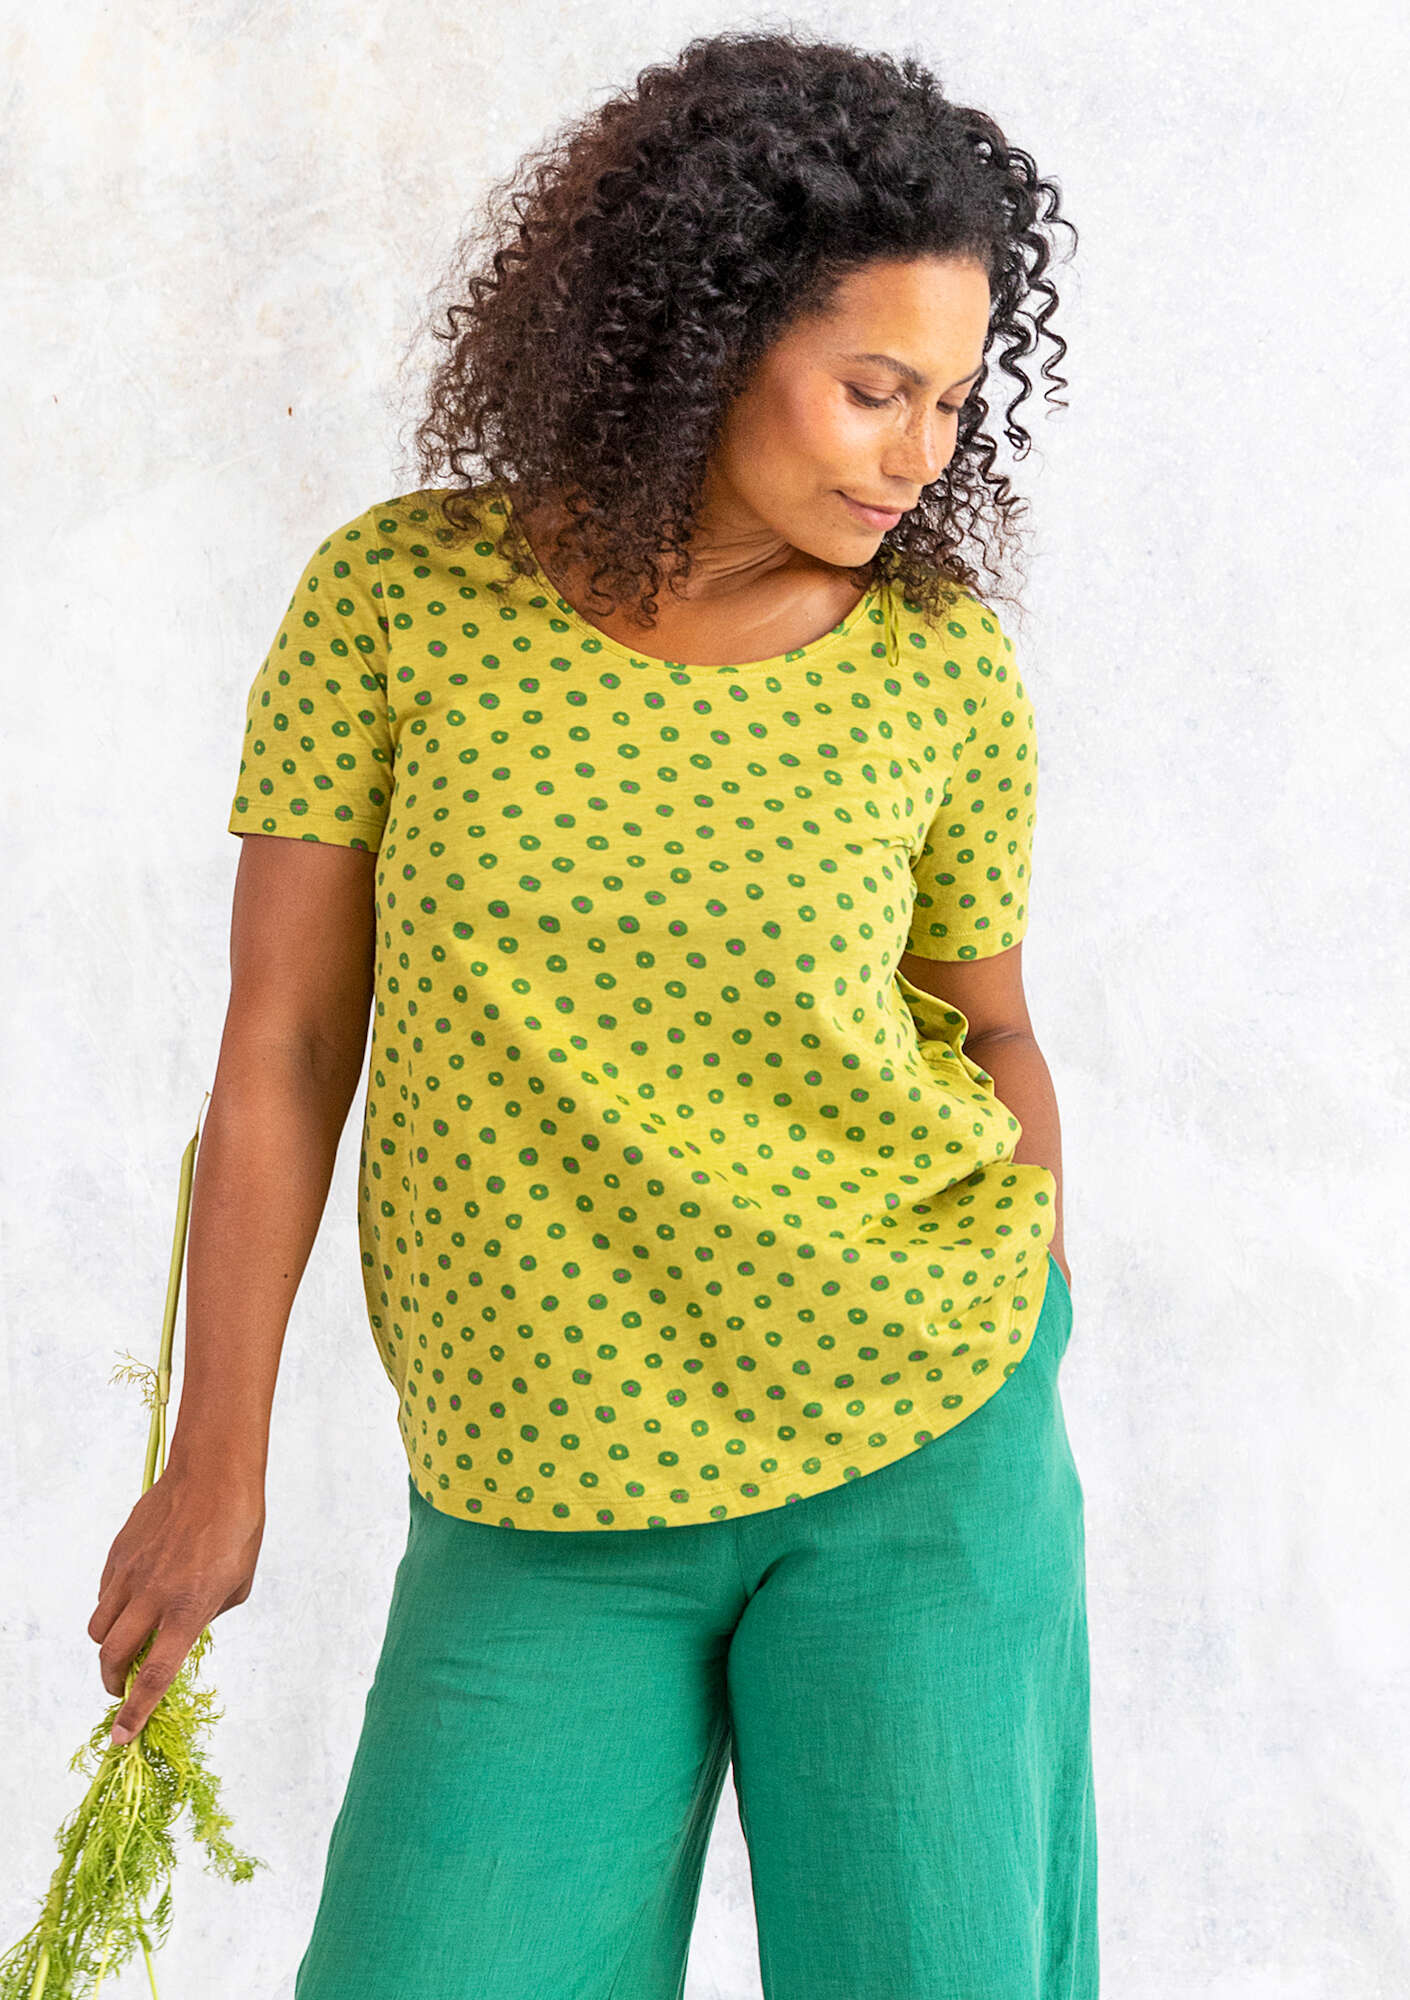 Ines short-sleeved jersey top in organic cotton guava/patterned